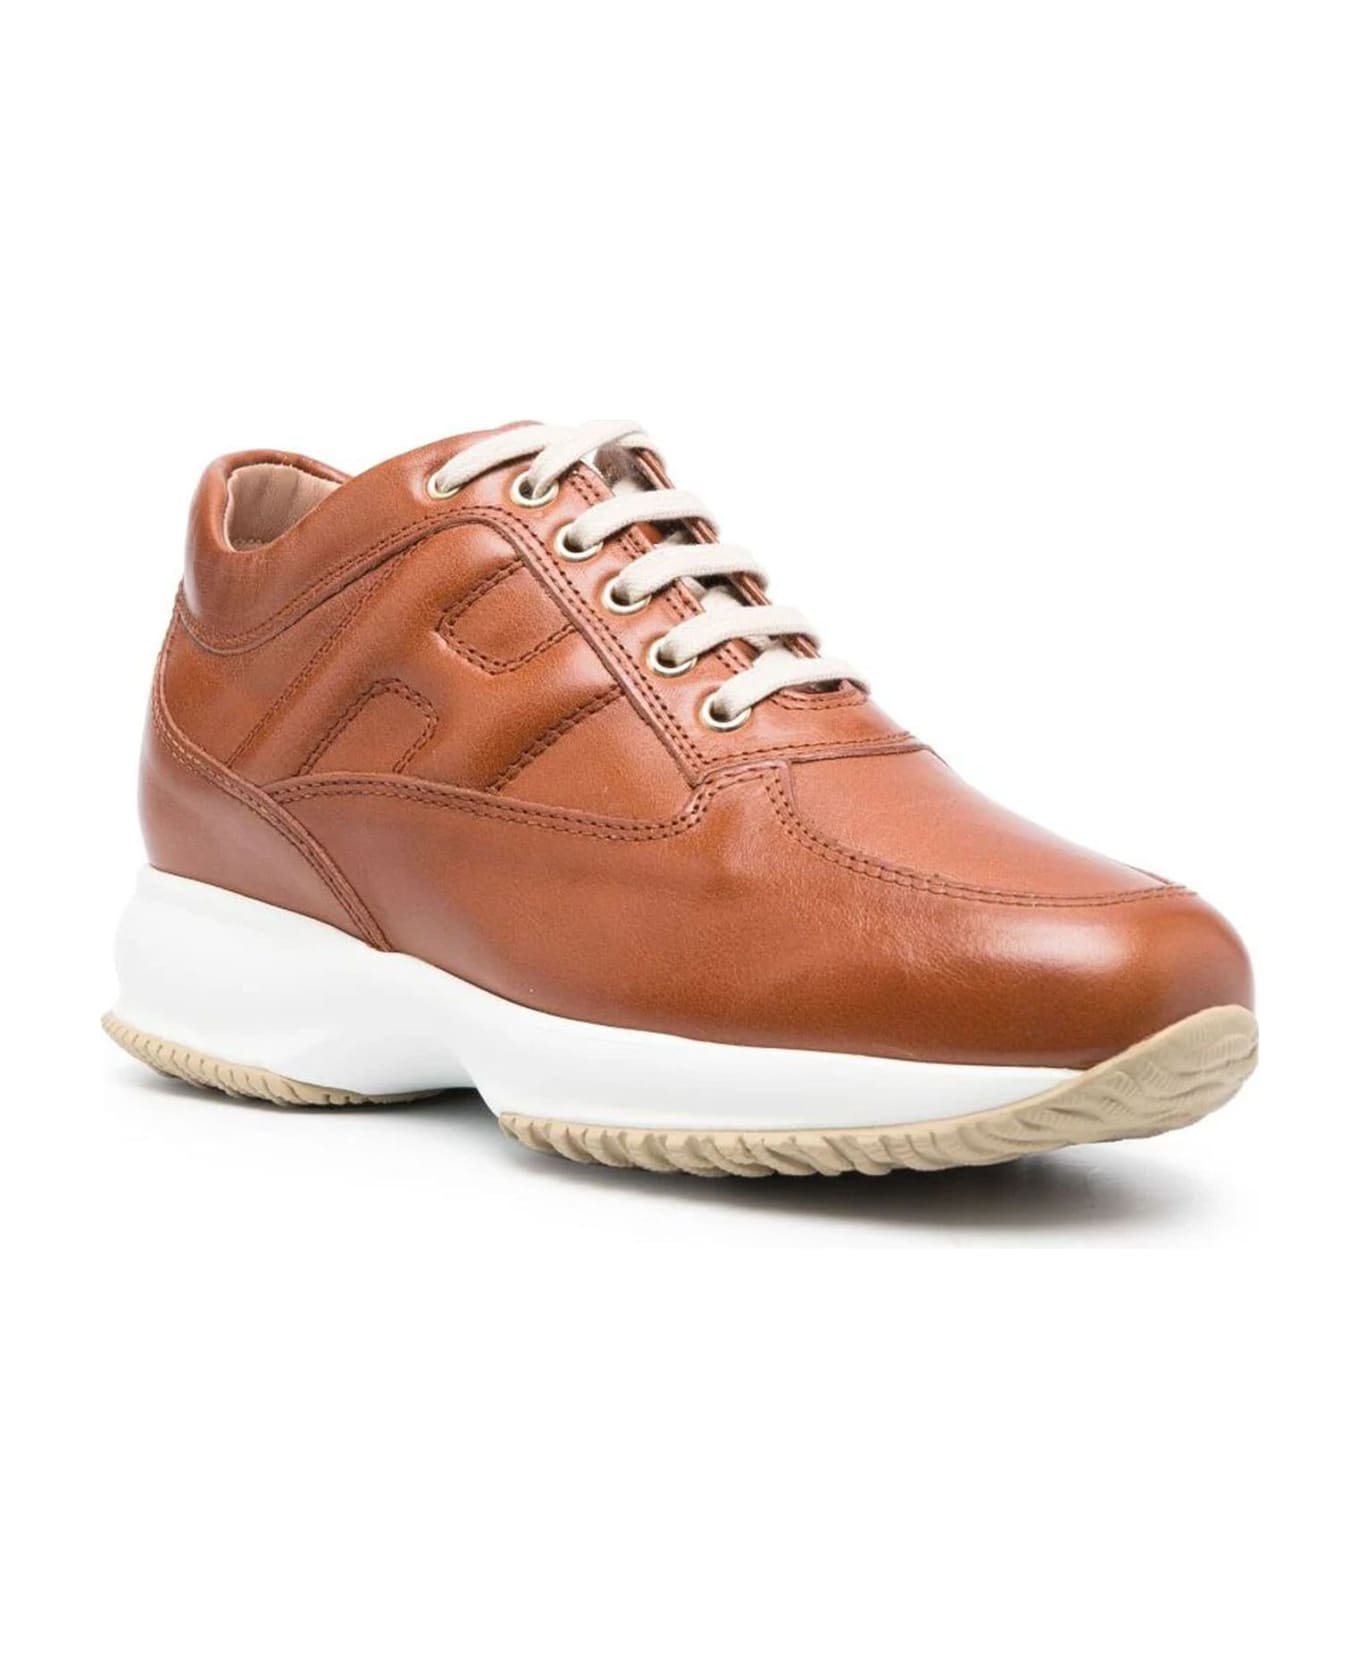 Hogan Interactive Lace-up Sneakers - Marrone